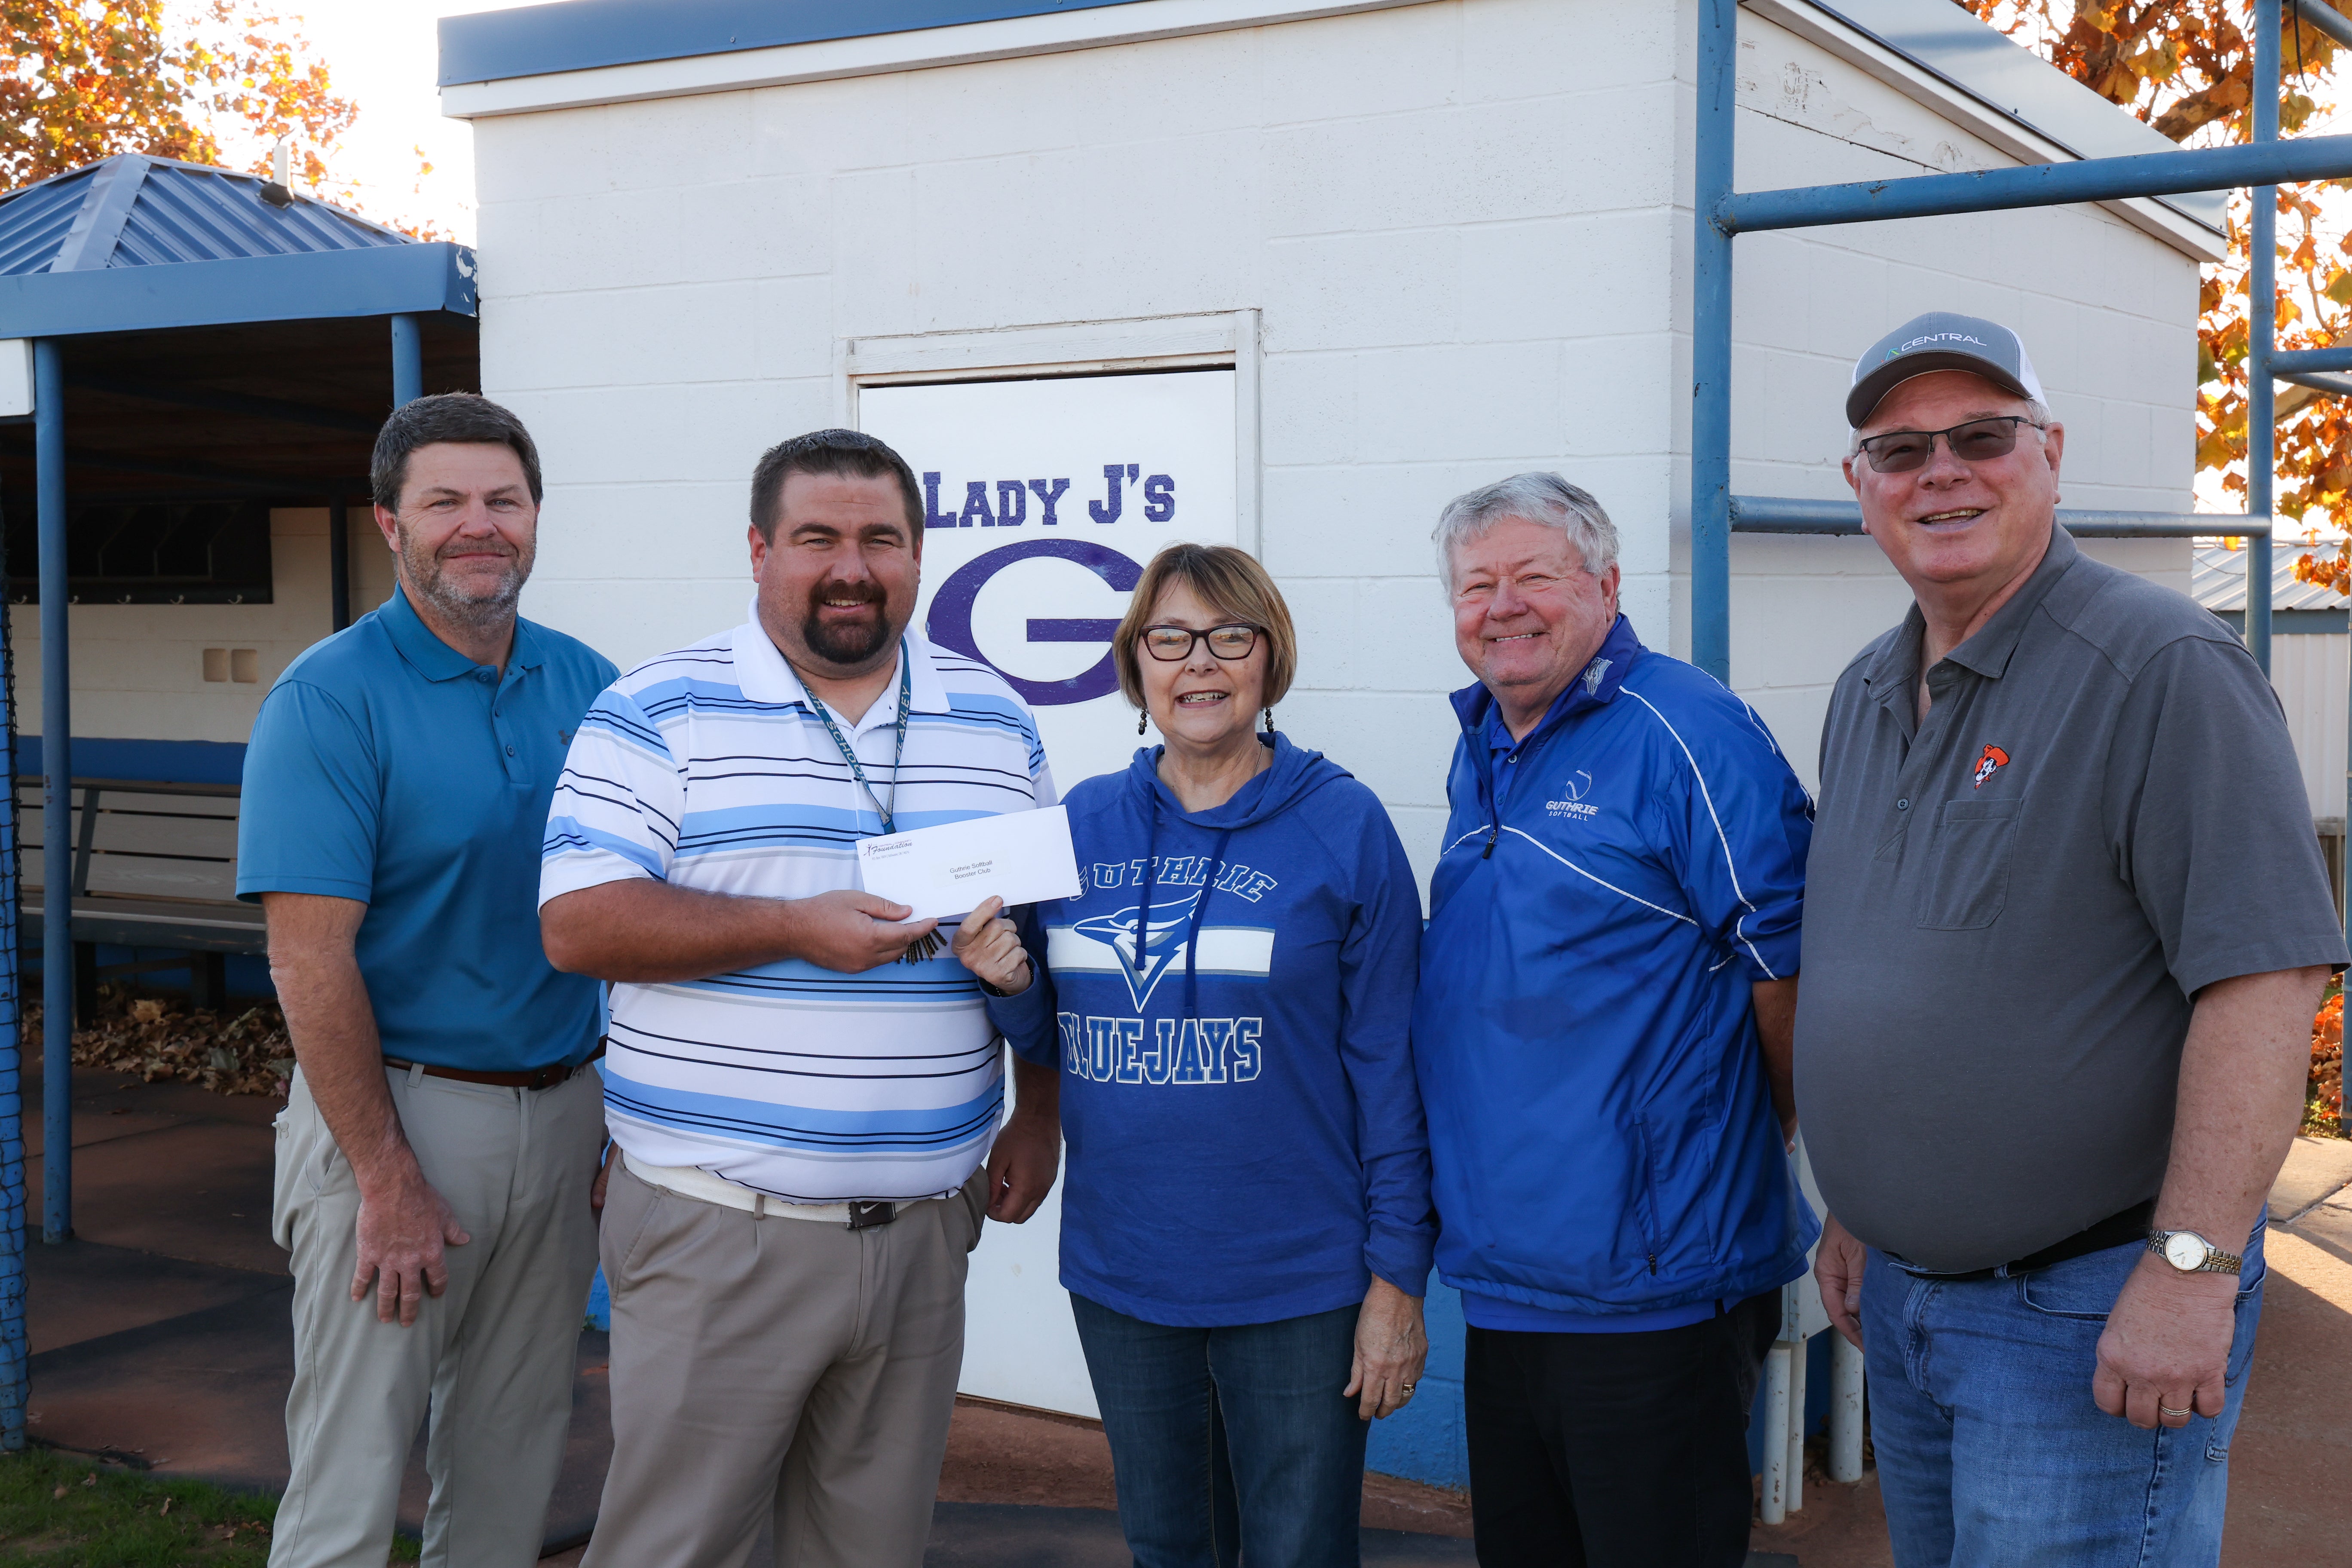 Shawn Ingle, Guthrie Booster Club President; Booker Blakely, Guthrie High School softball coach; Central Foundation board member Janie Carey; Ron Gillett, Guthrie Junior High softball coach; and Central board member Sid Sperry.